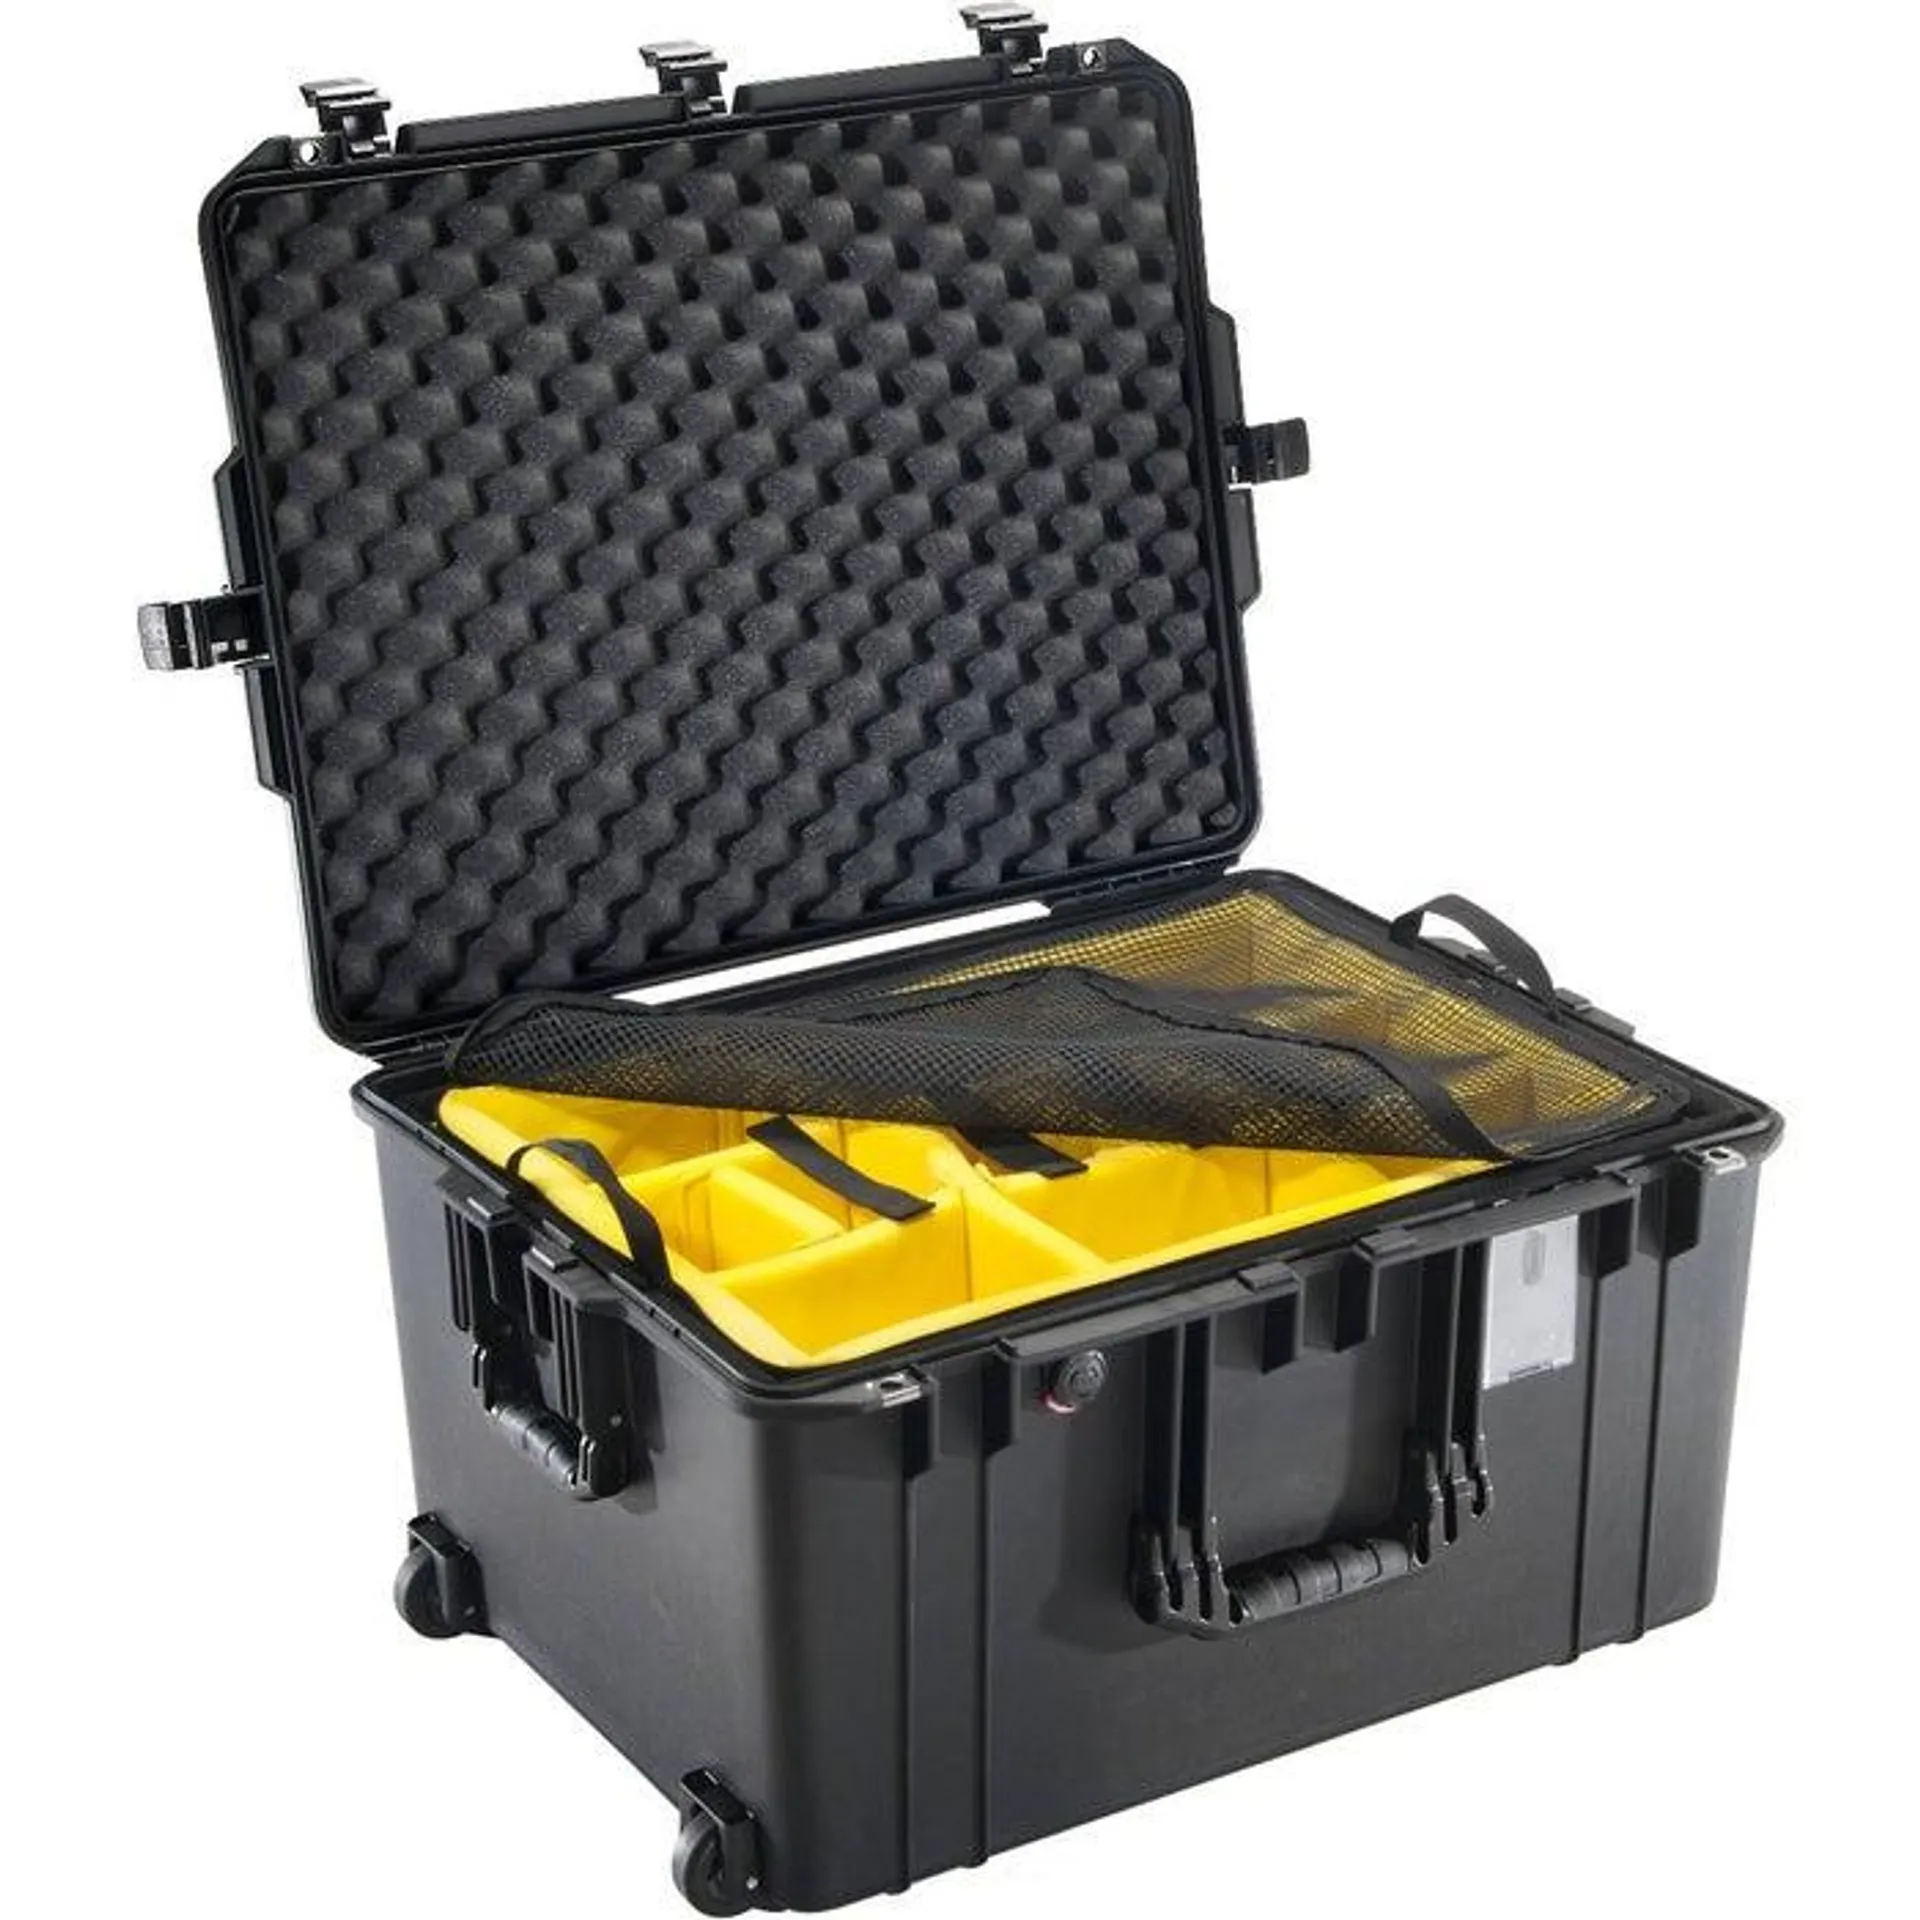 Pelican 1637 Case - Black with Padded Dividers